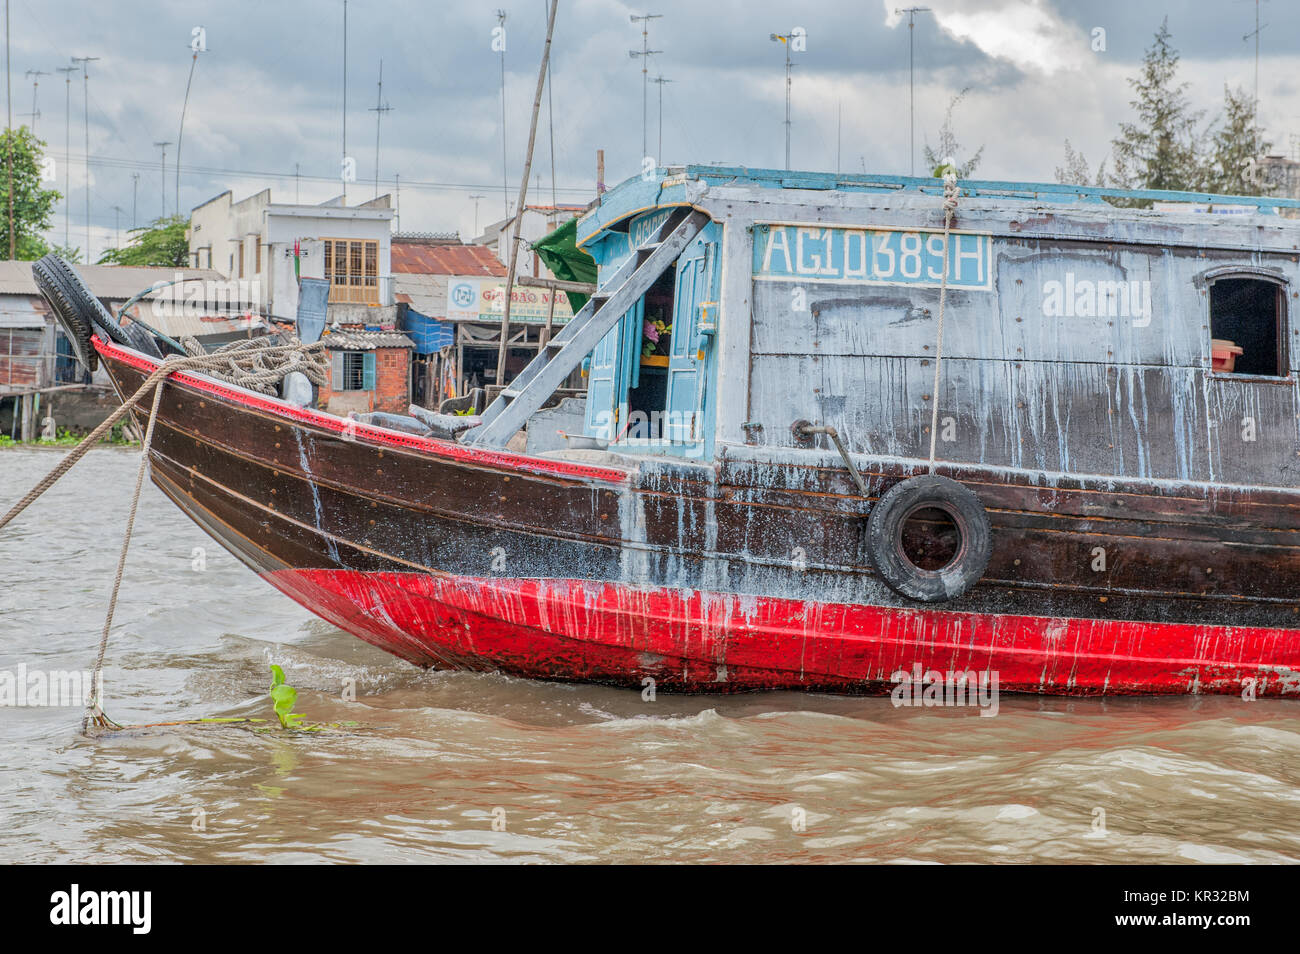 Traditional boat in the Mekong delta near Vinh Long, Vietnam. The Mekong river is a major route for transportation in Southeast Asia. Stock Photo